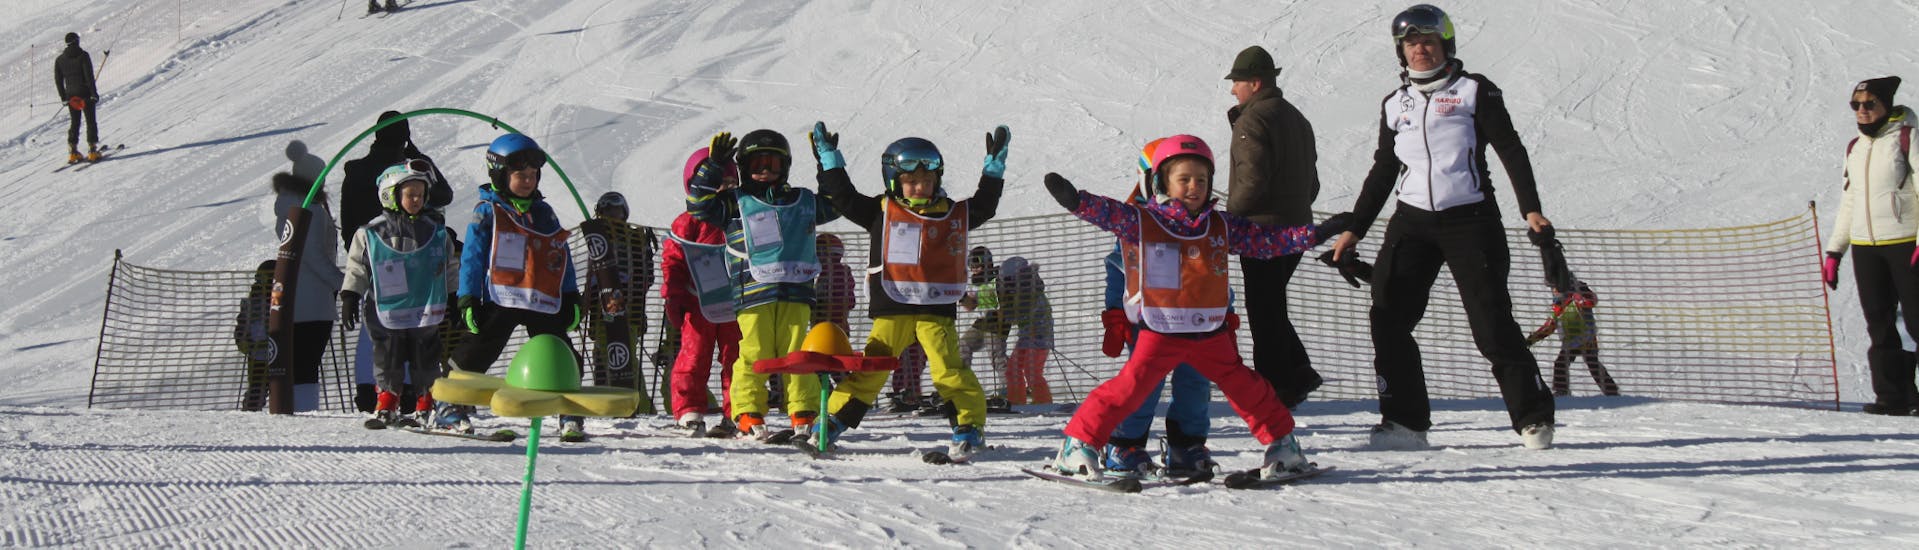 Children having fun during kids ski lessons (4-6 y.) for beginners with the Giorgio Rocca Ski Academy in Crans-Montana.